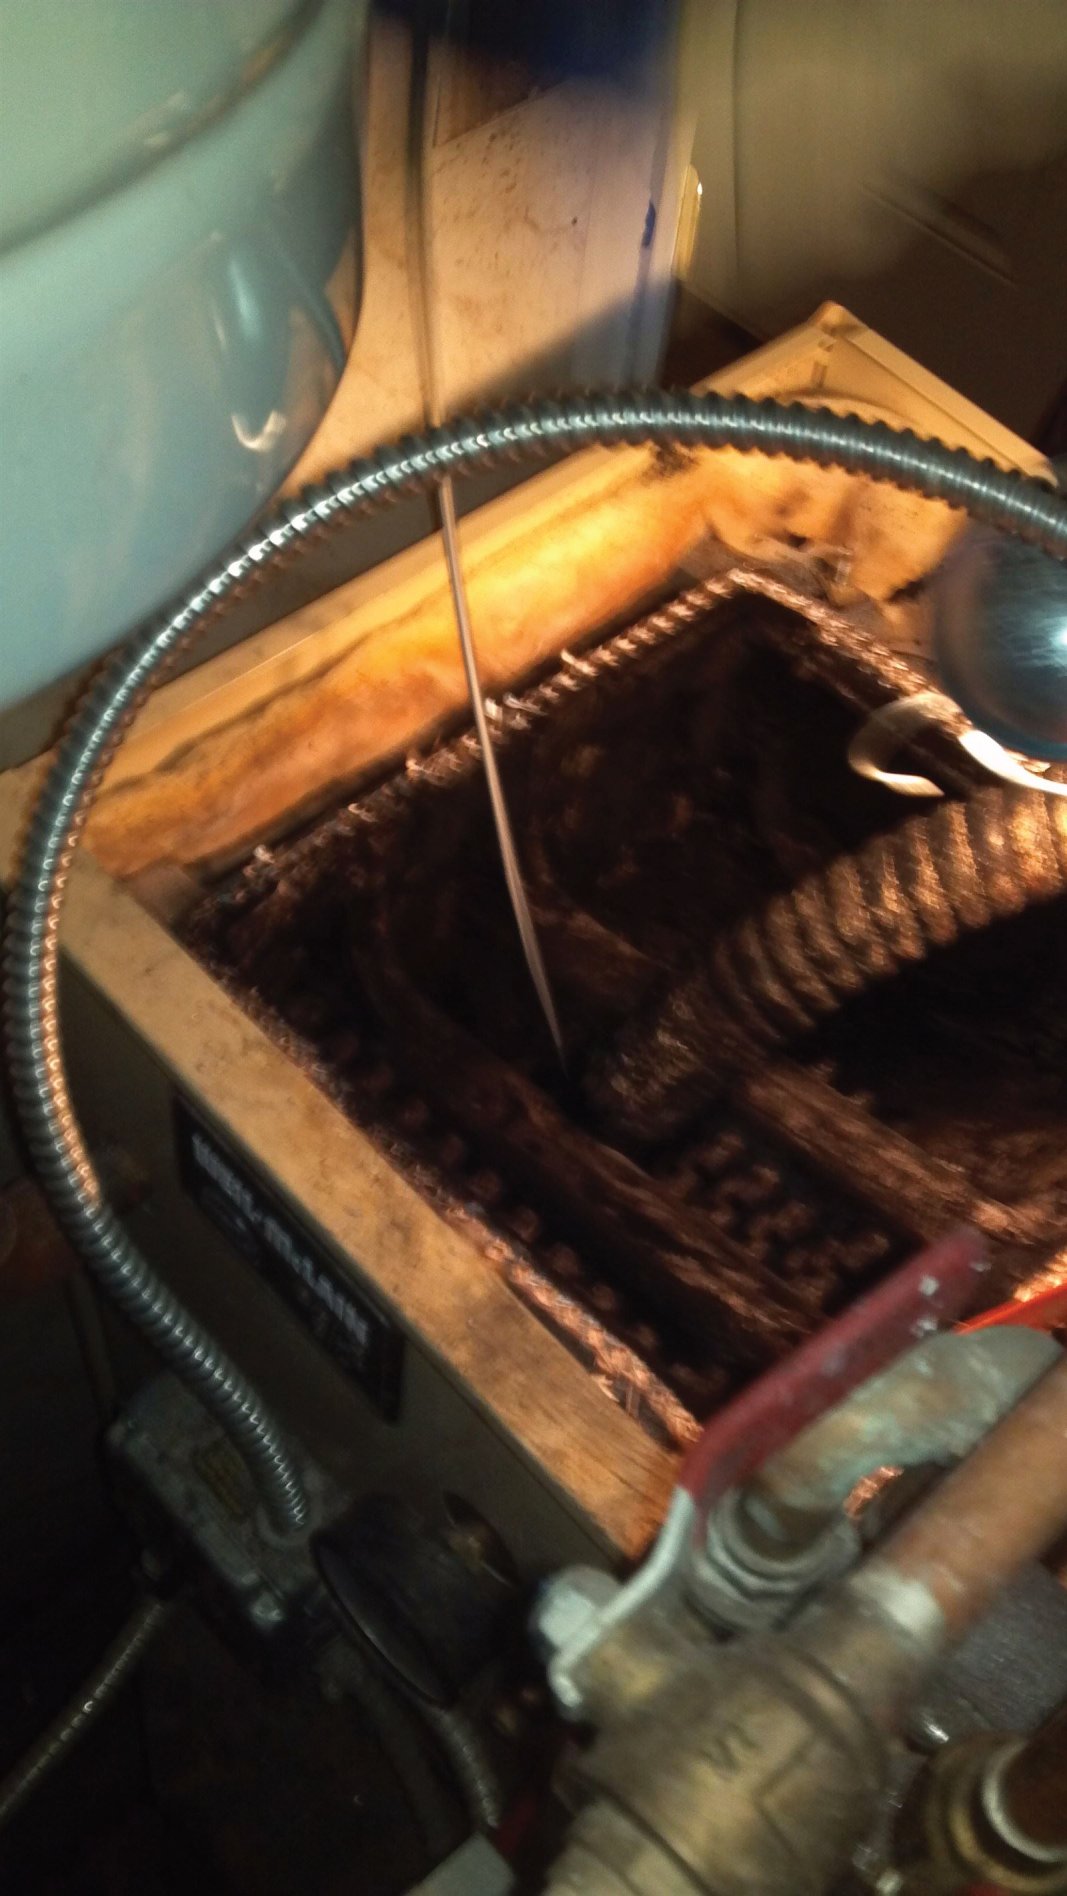 Nasty Boiler!  Remember to clean your oil boiler every year!